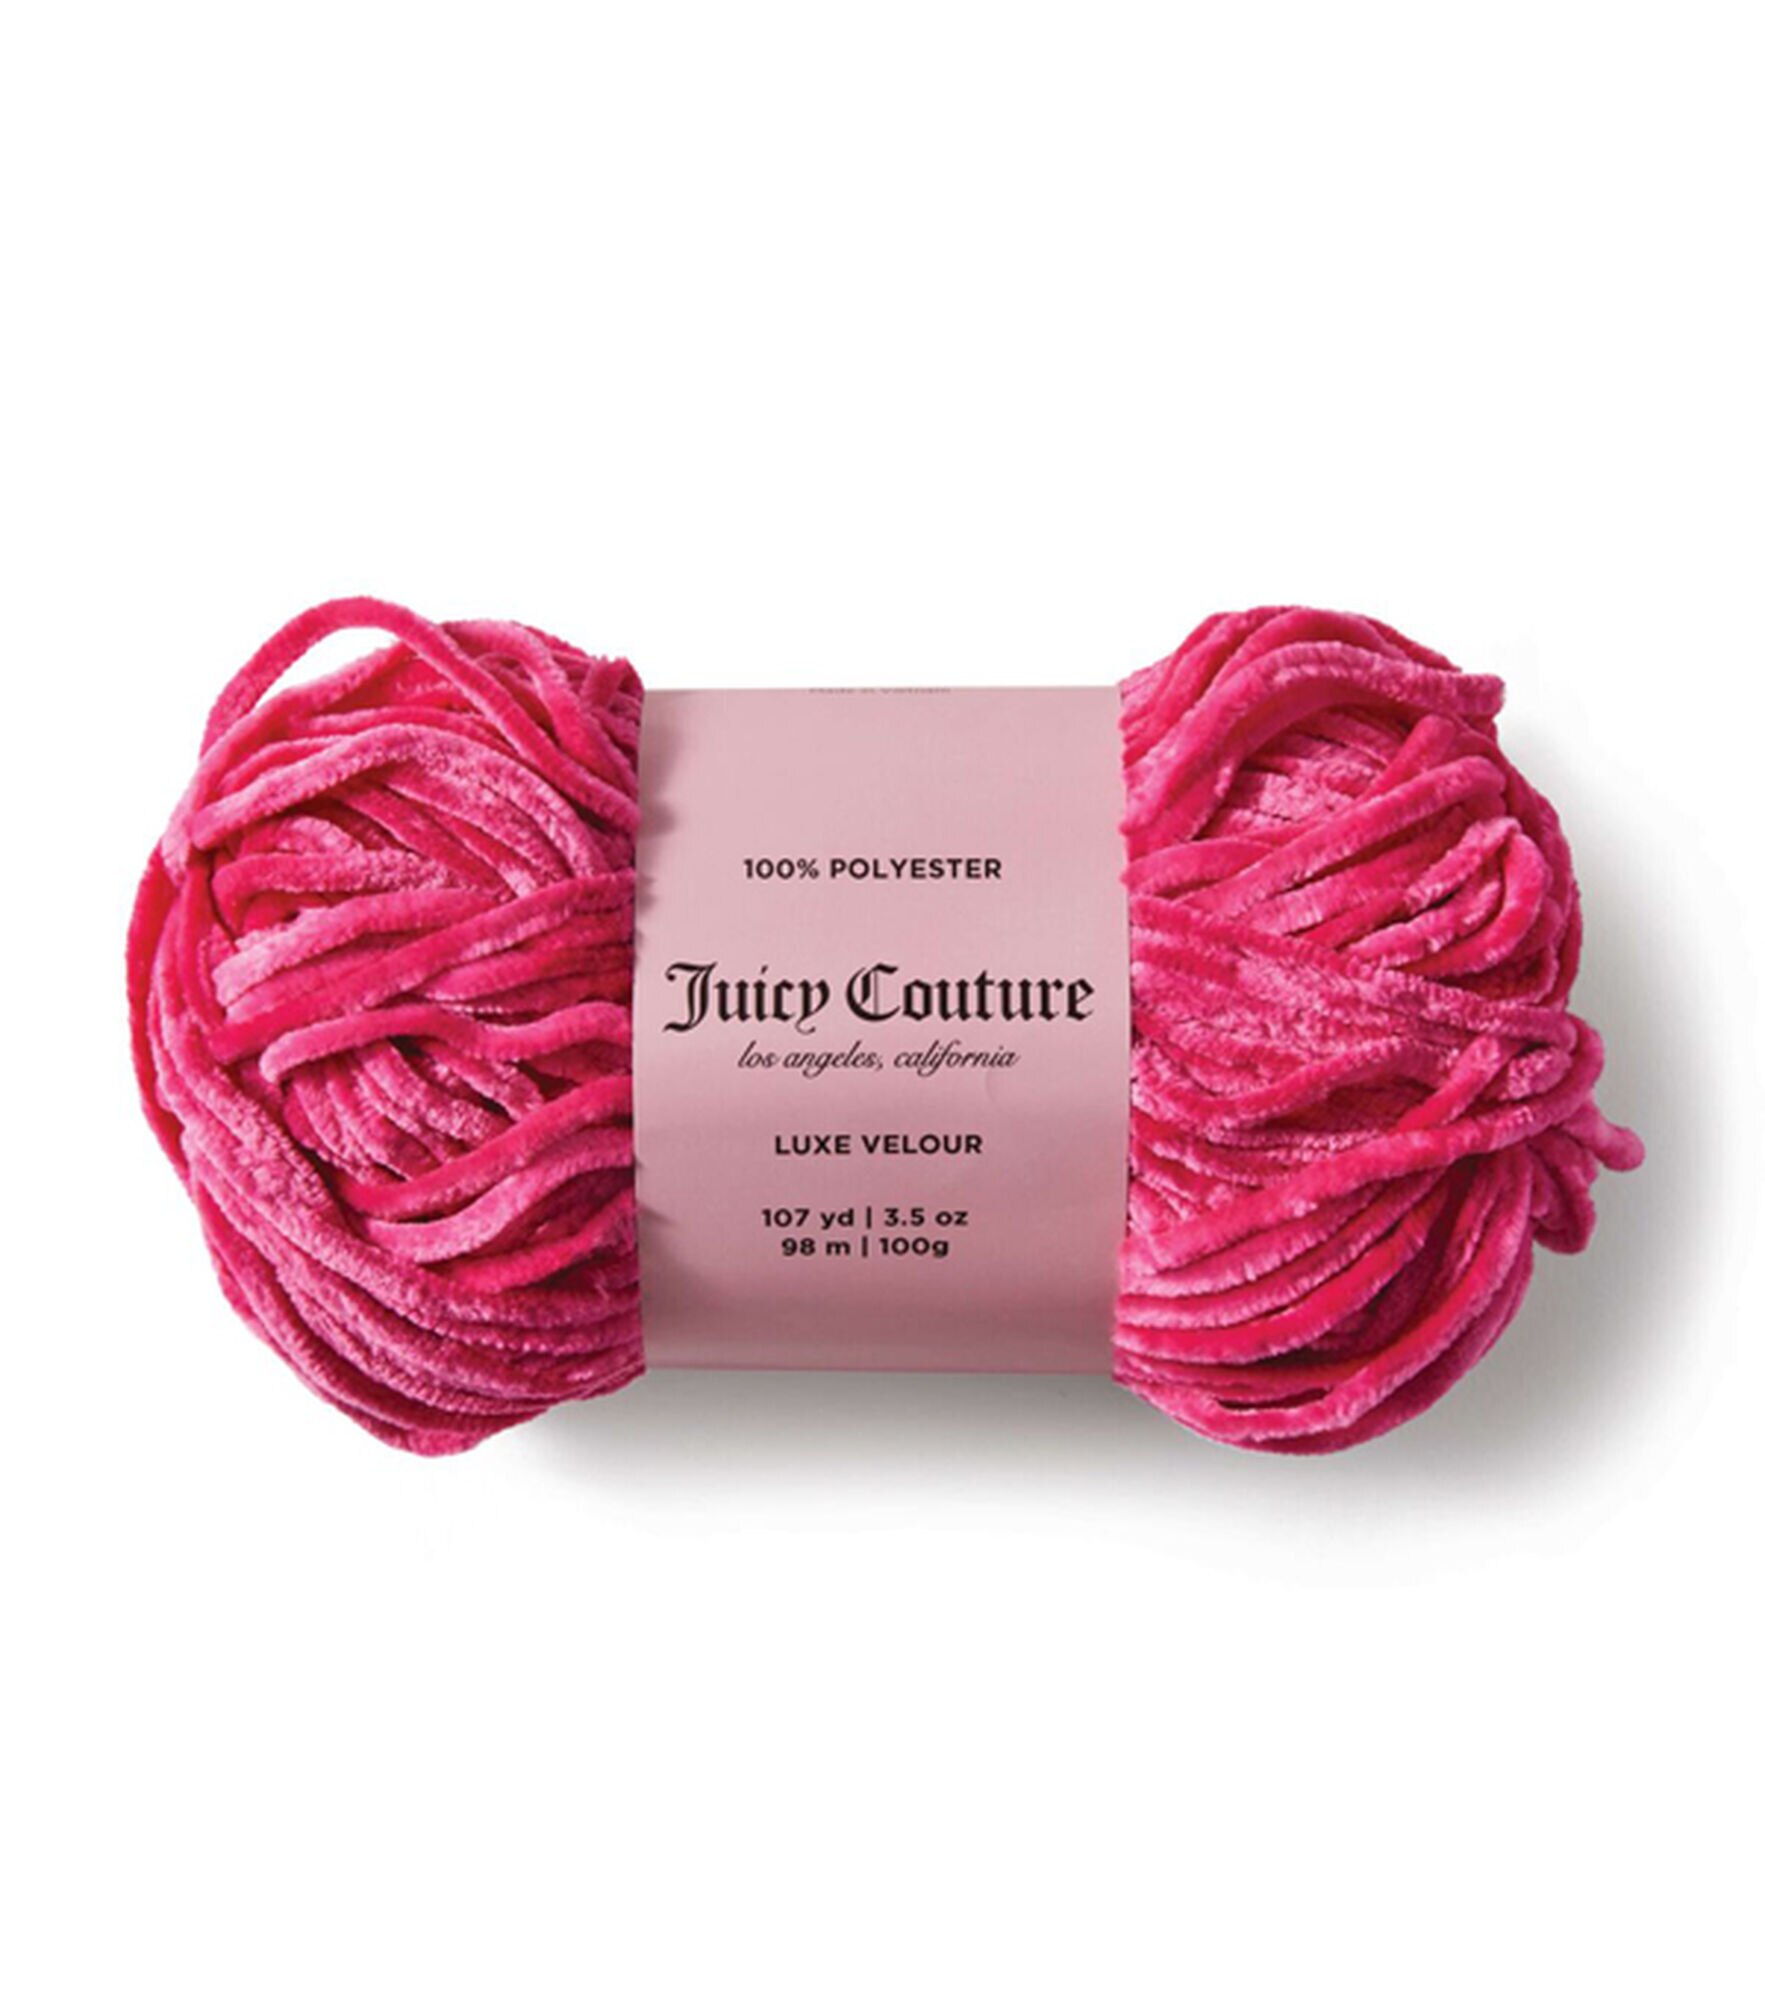 Juicy Couture Luxe Velour 107yds Bulky Polyester Yarn, Free Love, hi-res